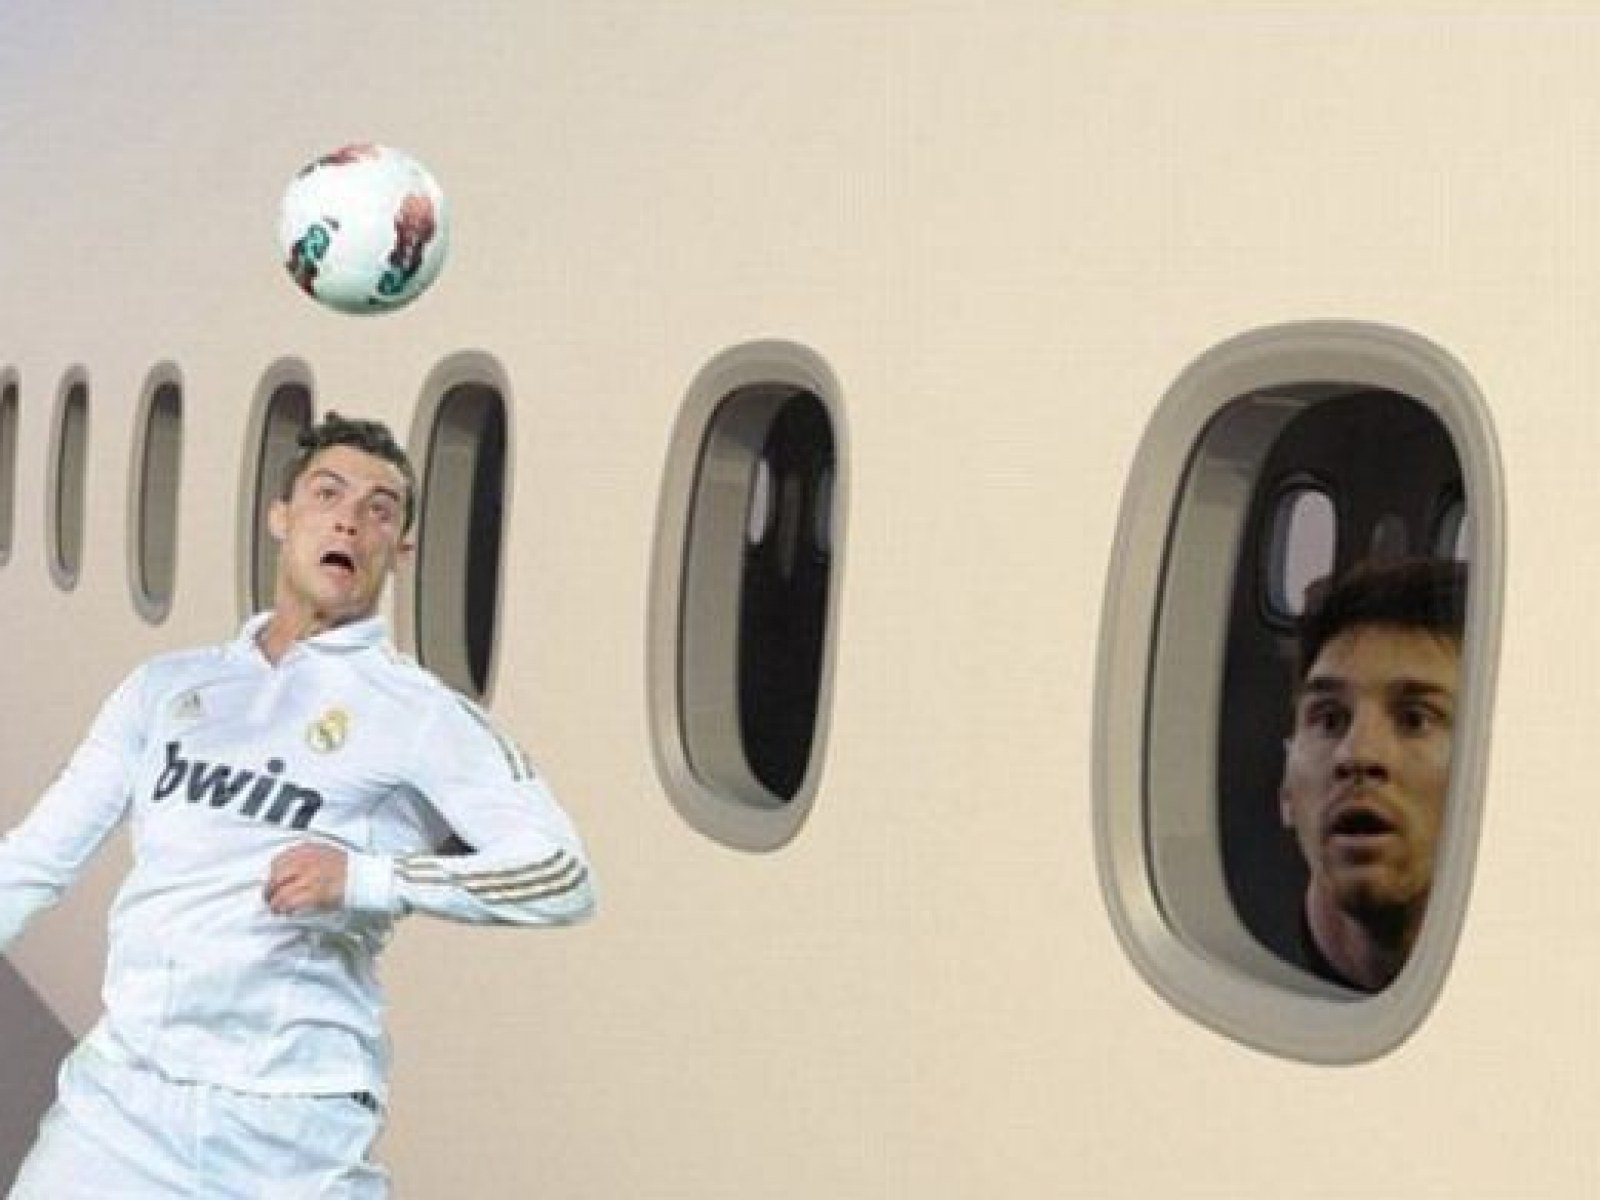 Cristiano Ronaldo's Powerful Header against Manchester United: Hilarious  Internet Memes of Real Madrid Star [PHOTOS]